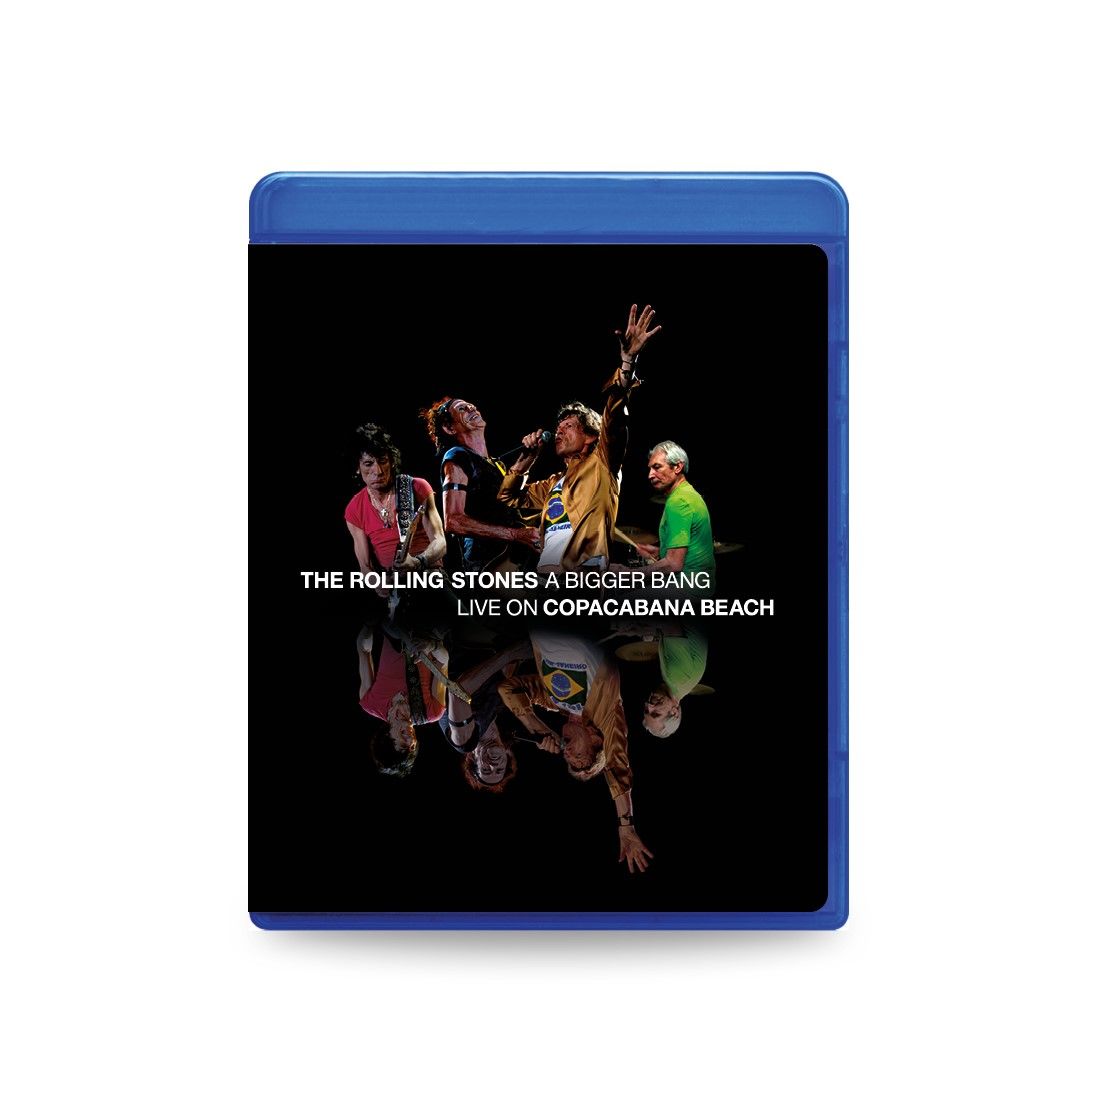 The Rolling Stones - ‘A Bigger Bang’ Live On Copacabana Beach: SD Blu-Ray